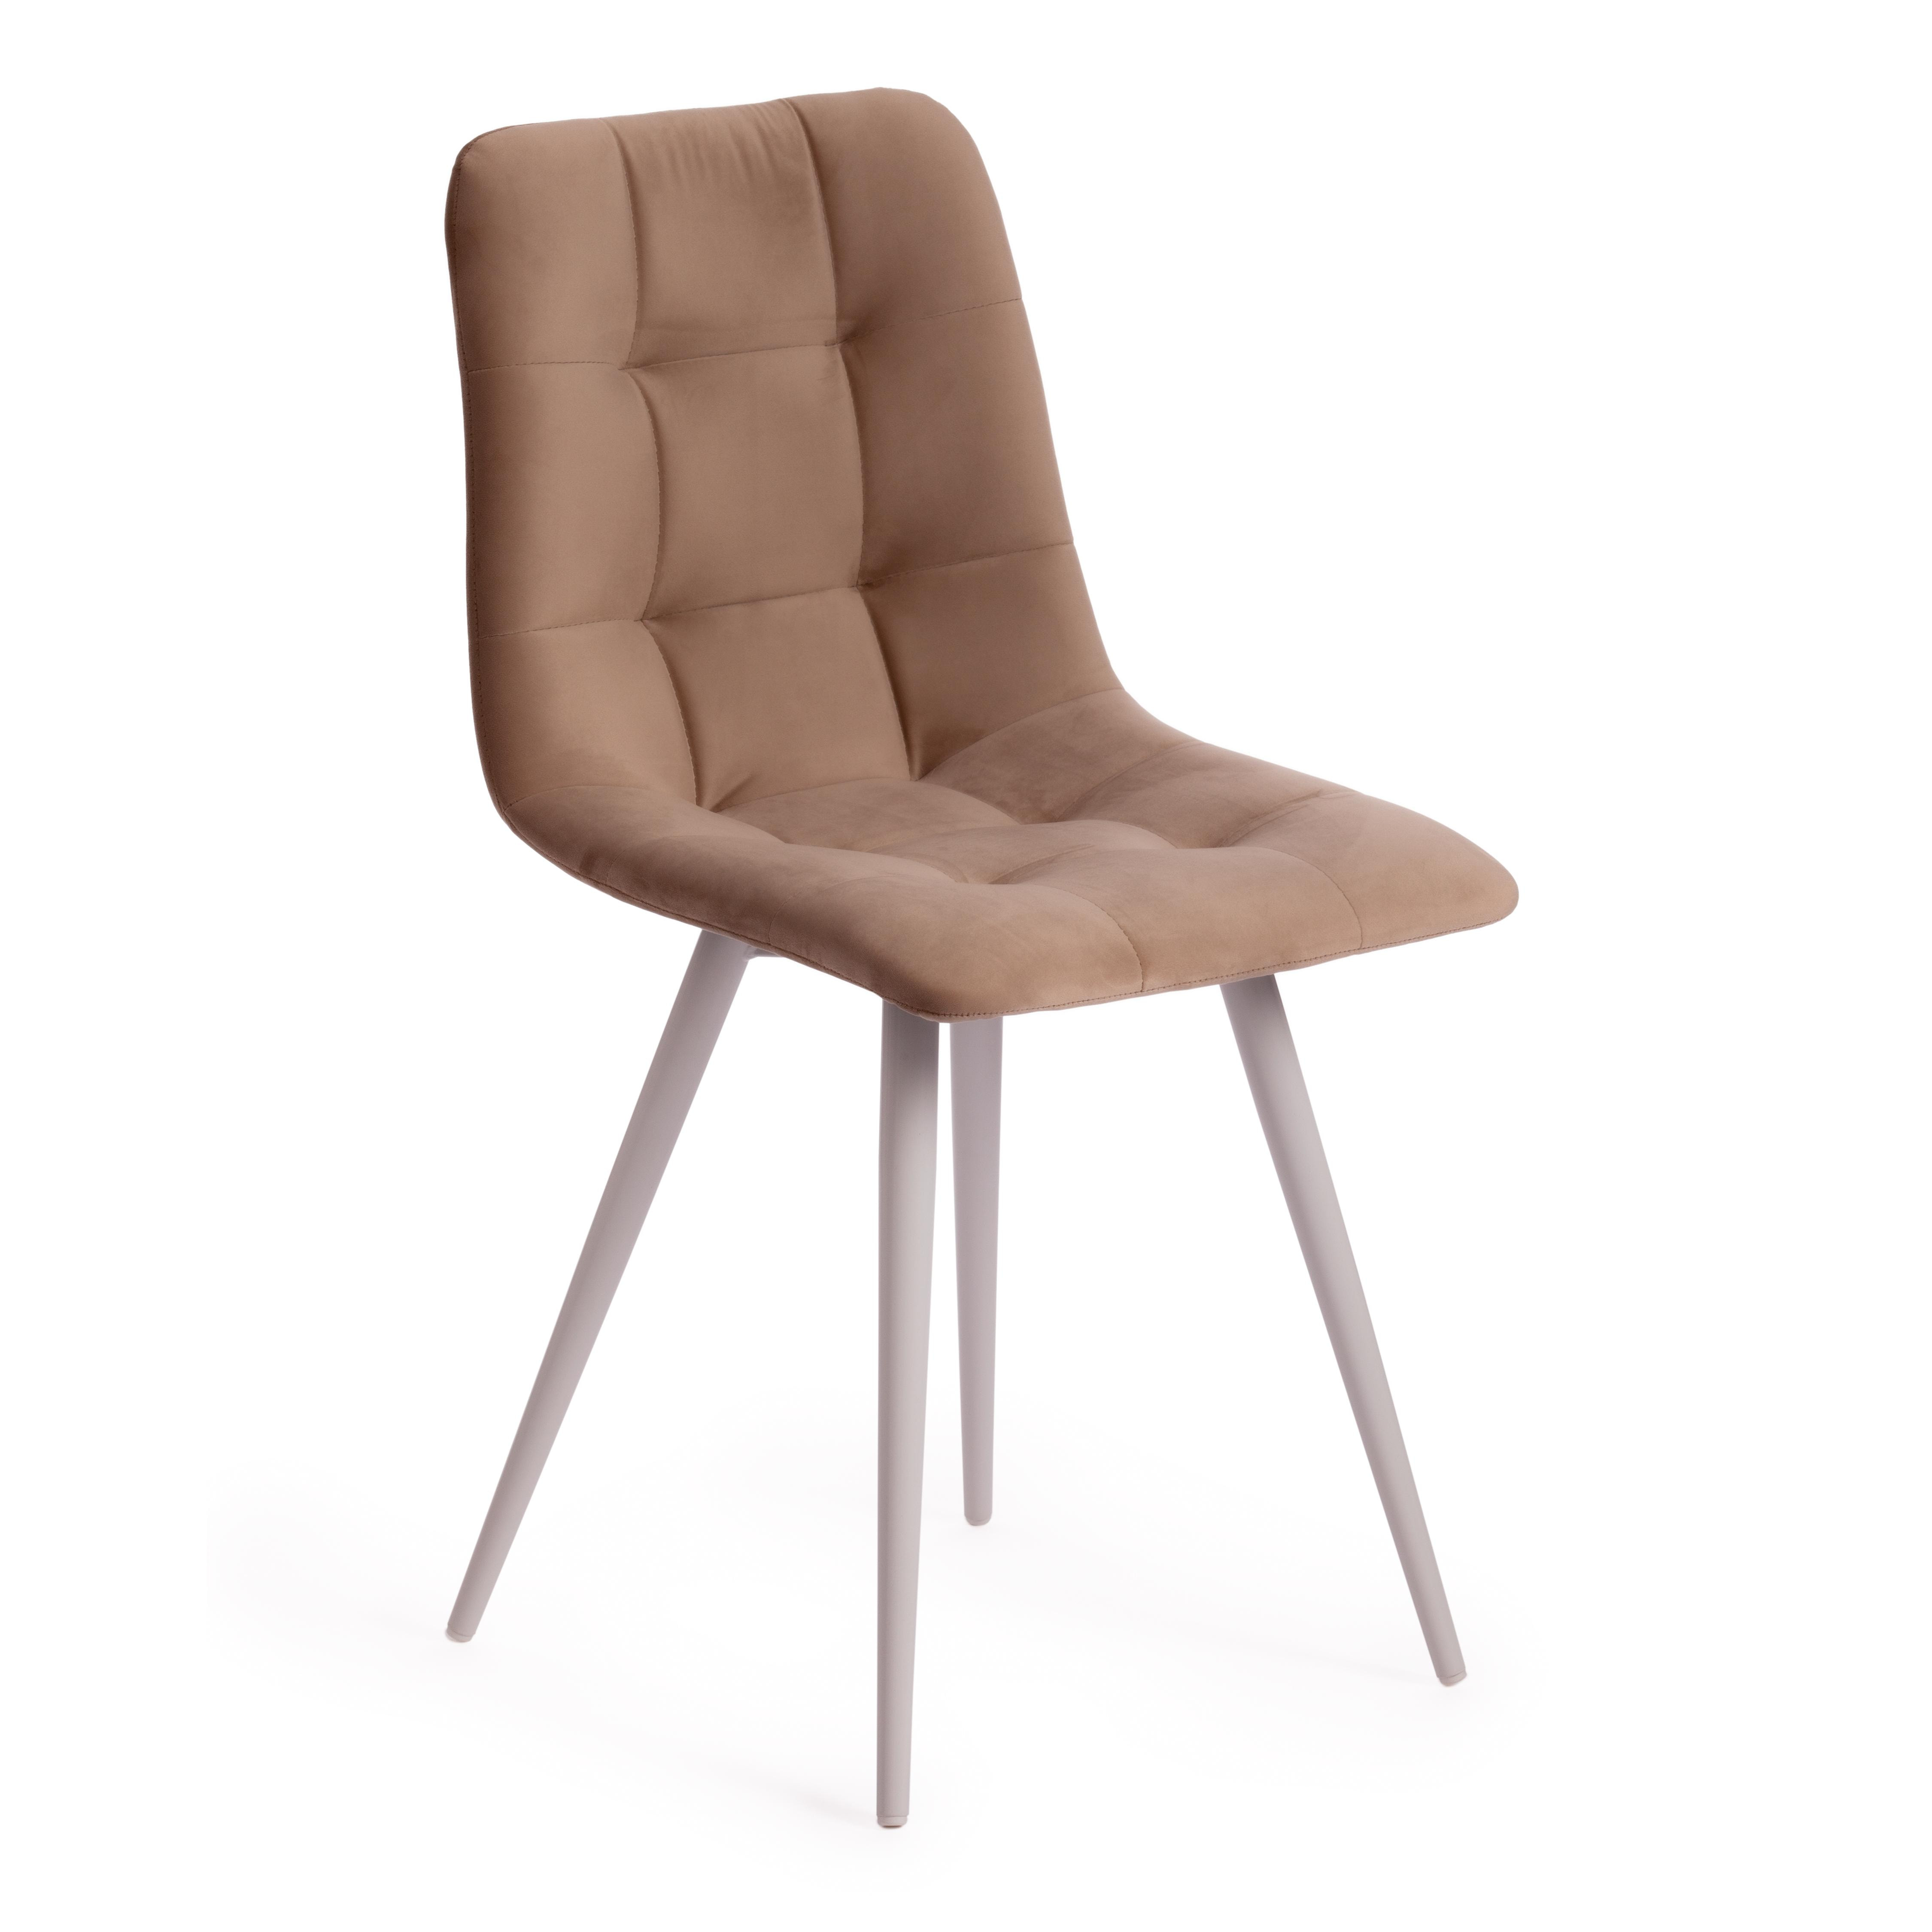  TetChair Chilly 7095-1 beige barkhat,  